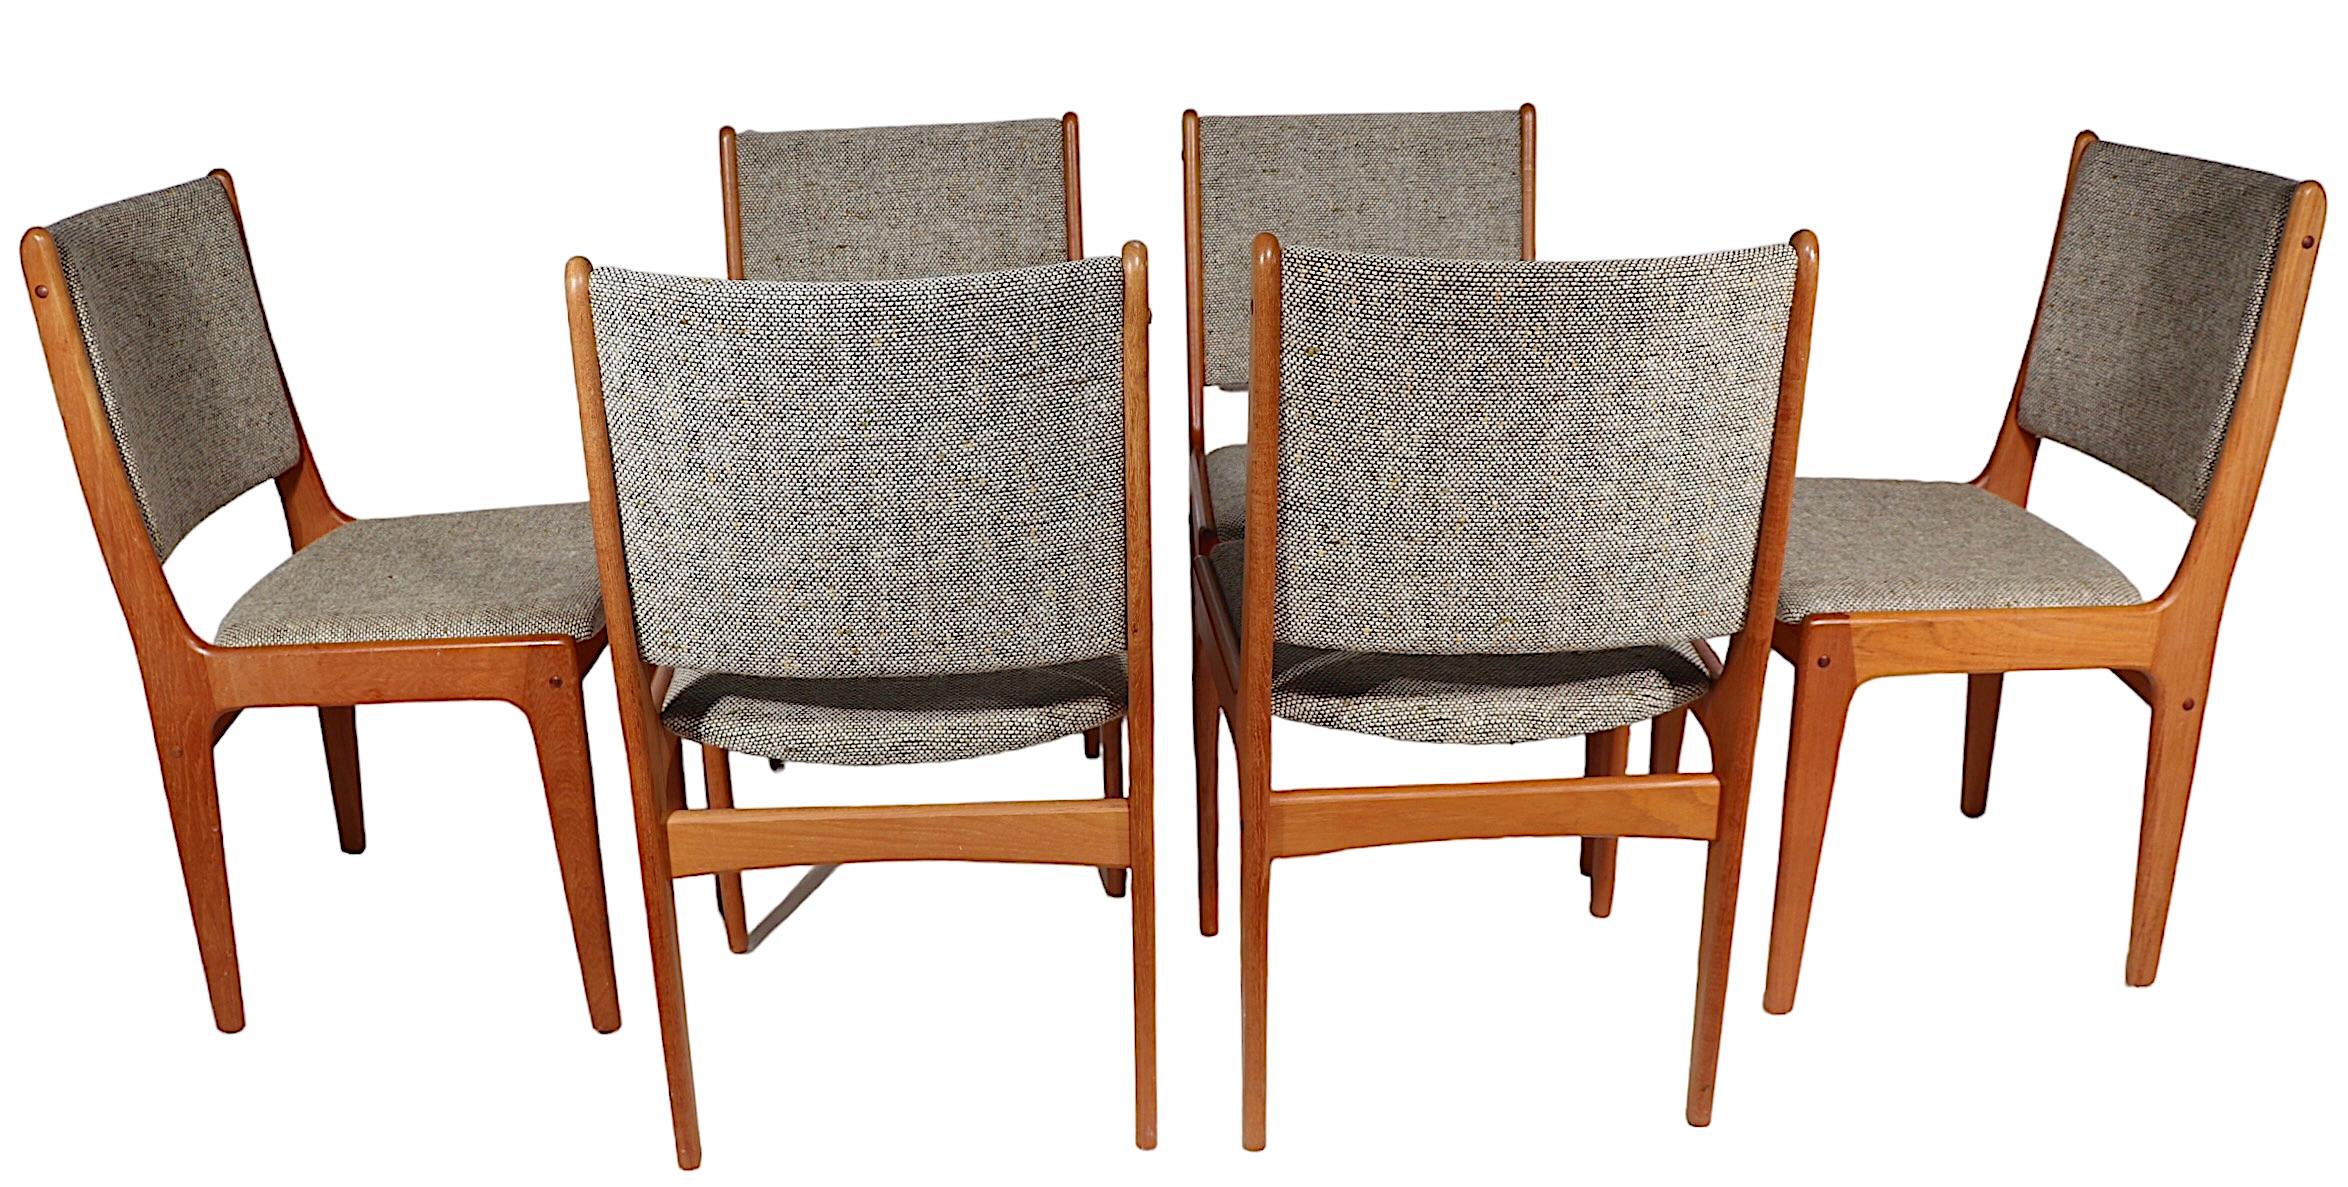 Danish Mid Century Modern Dining Chairs by Johannes Andersen for Uldum Mobler  For Sale 1